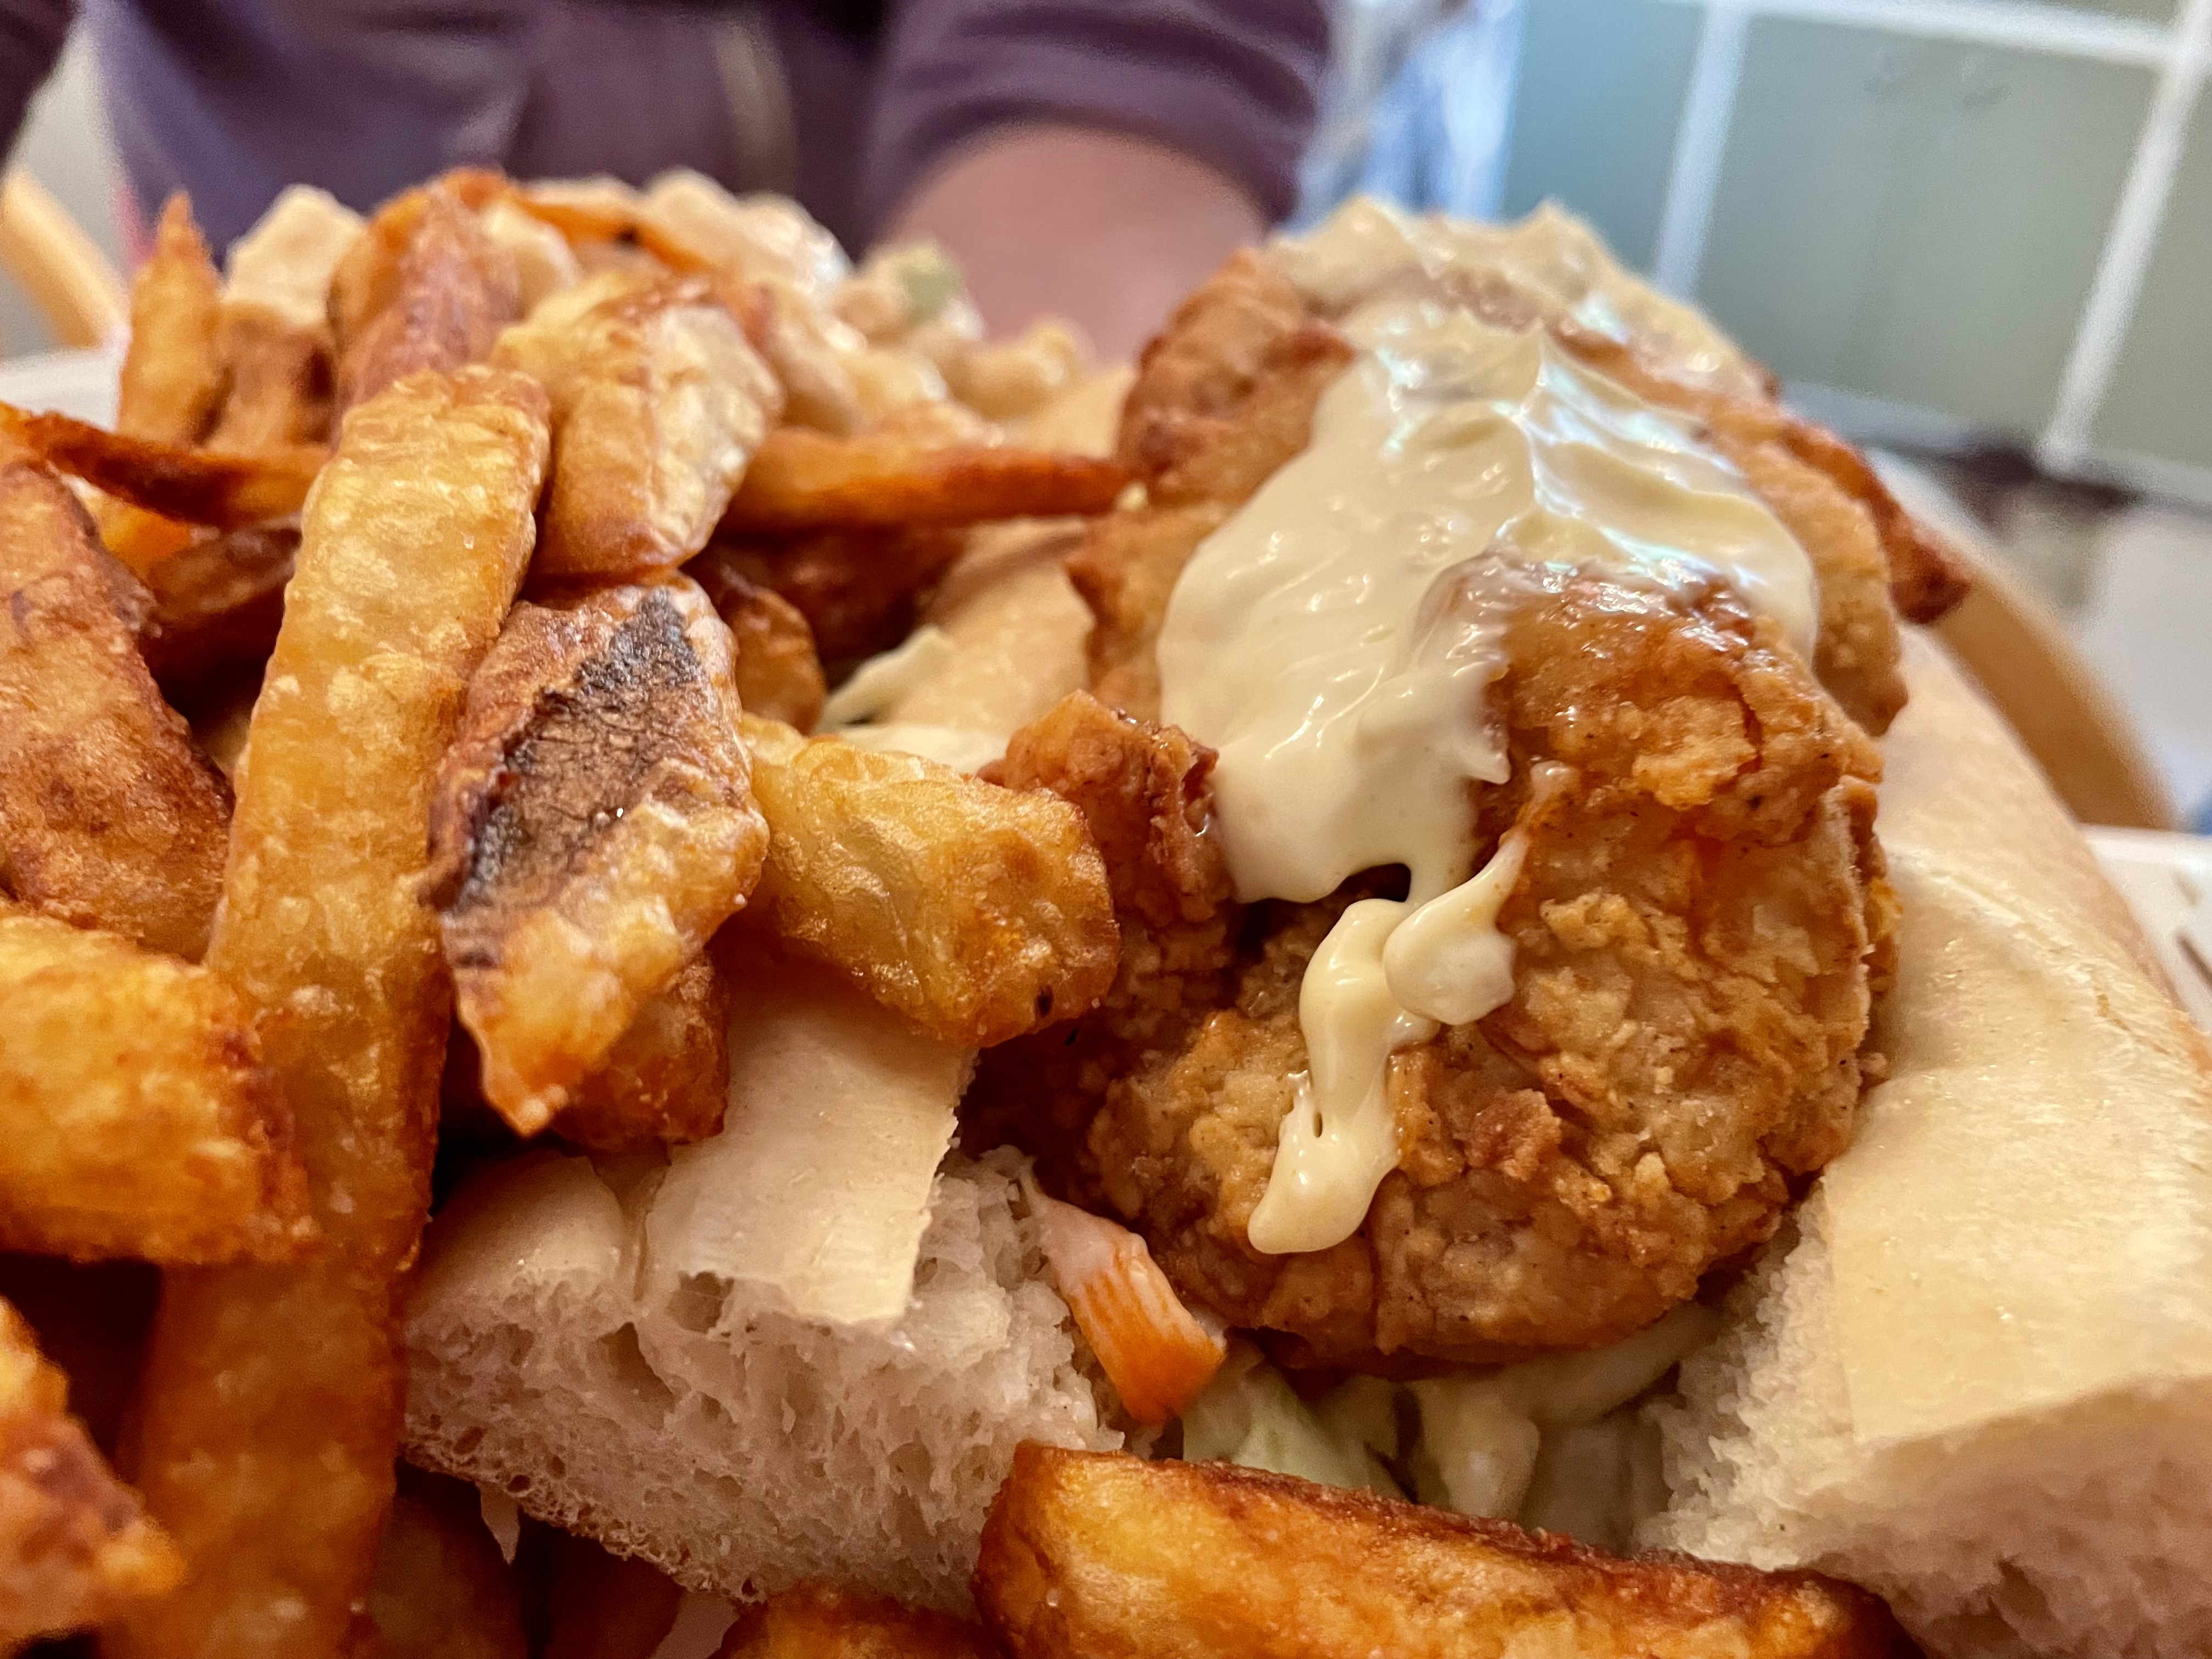 The po' boy came with remoulade—a traditional French sauce, originally made with ingredients such as mayonnaise, herbs, capers, pickles, and perhaps some anchovy oil or horseradish